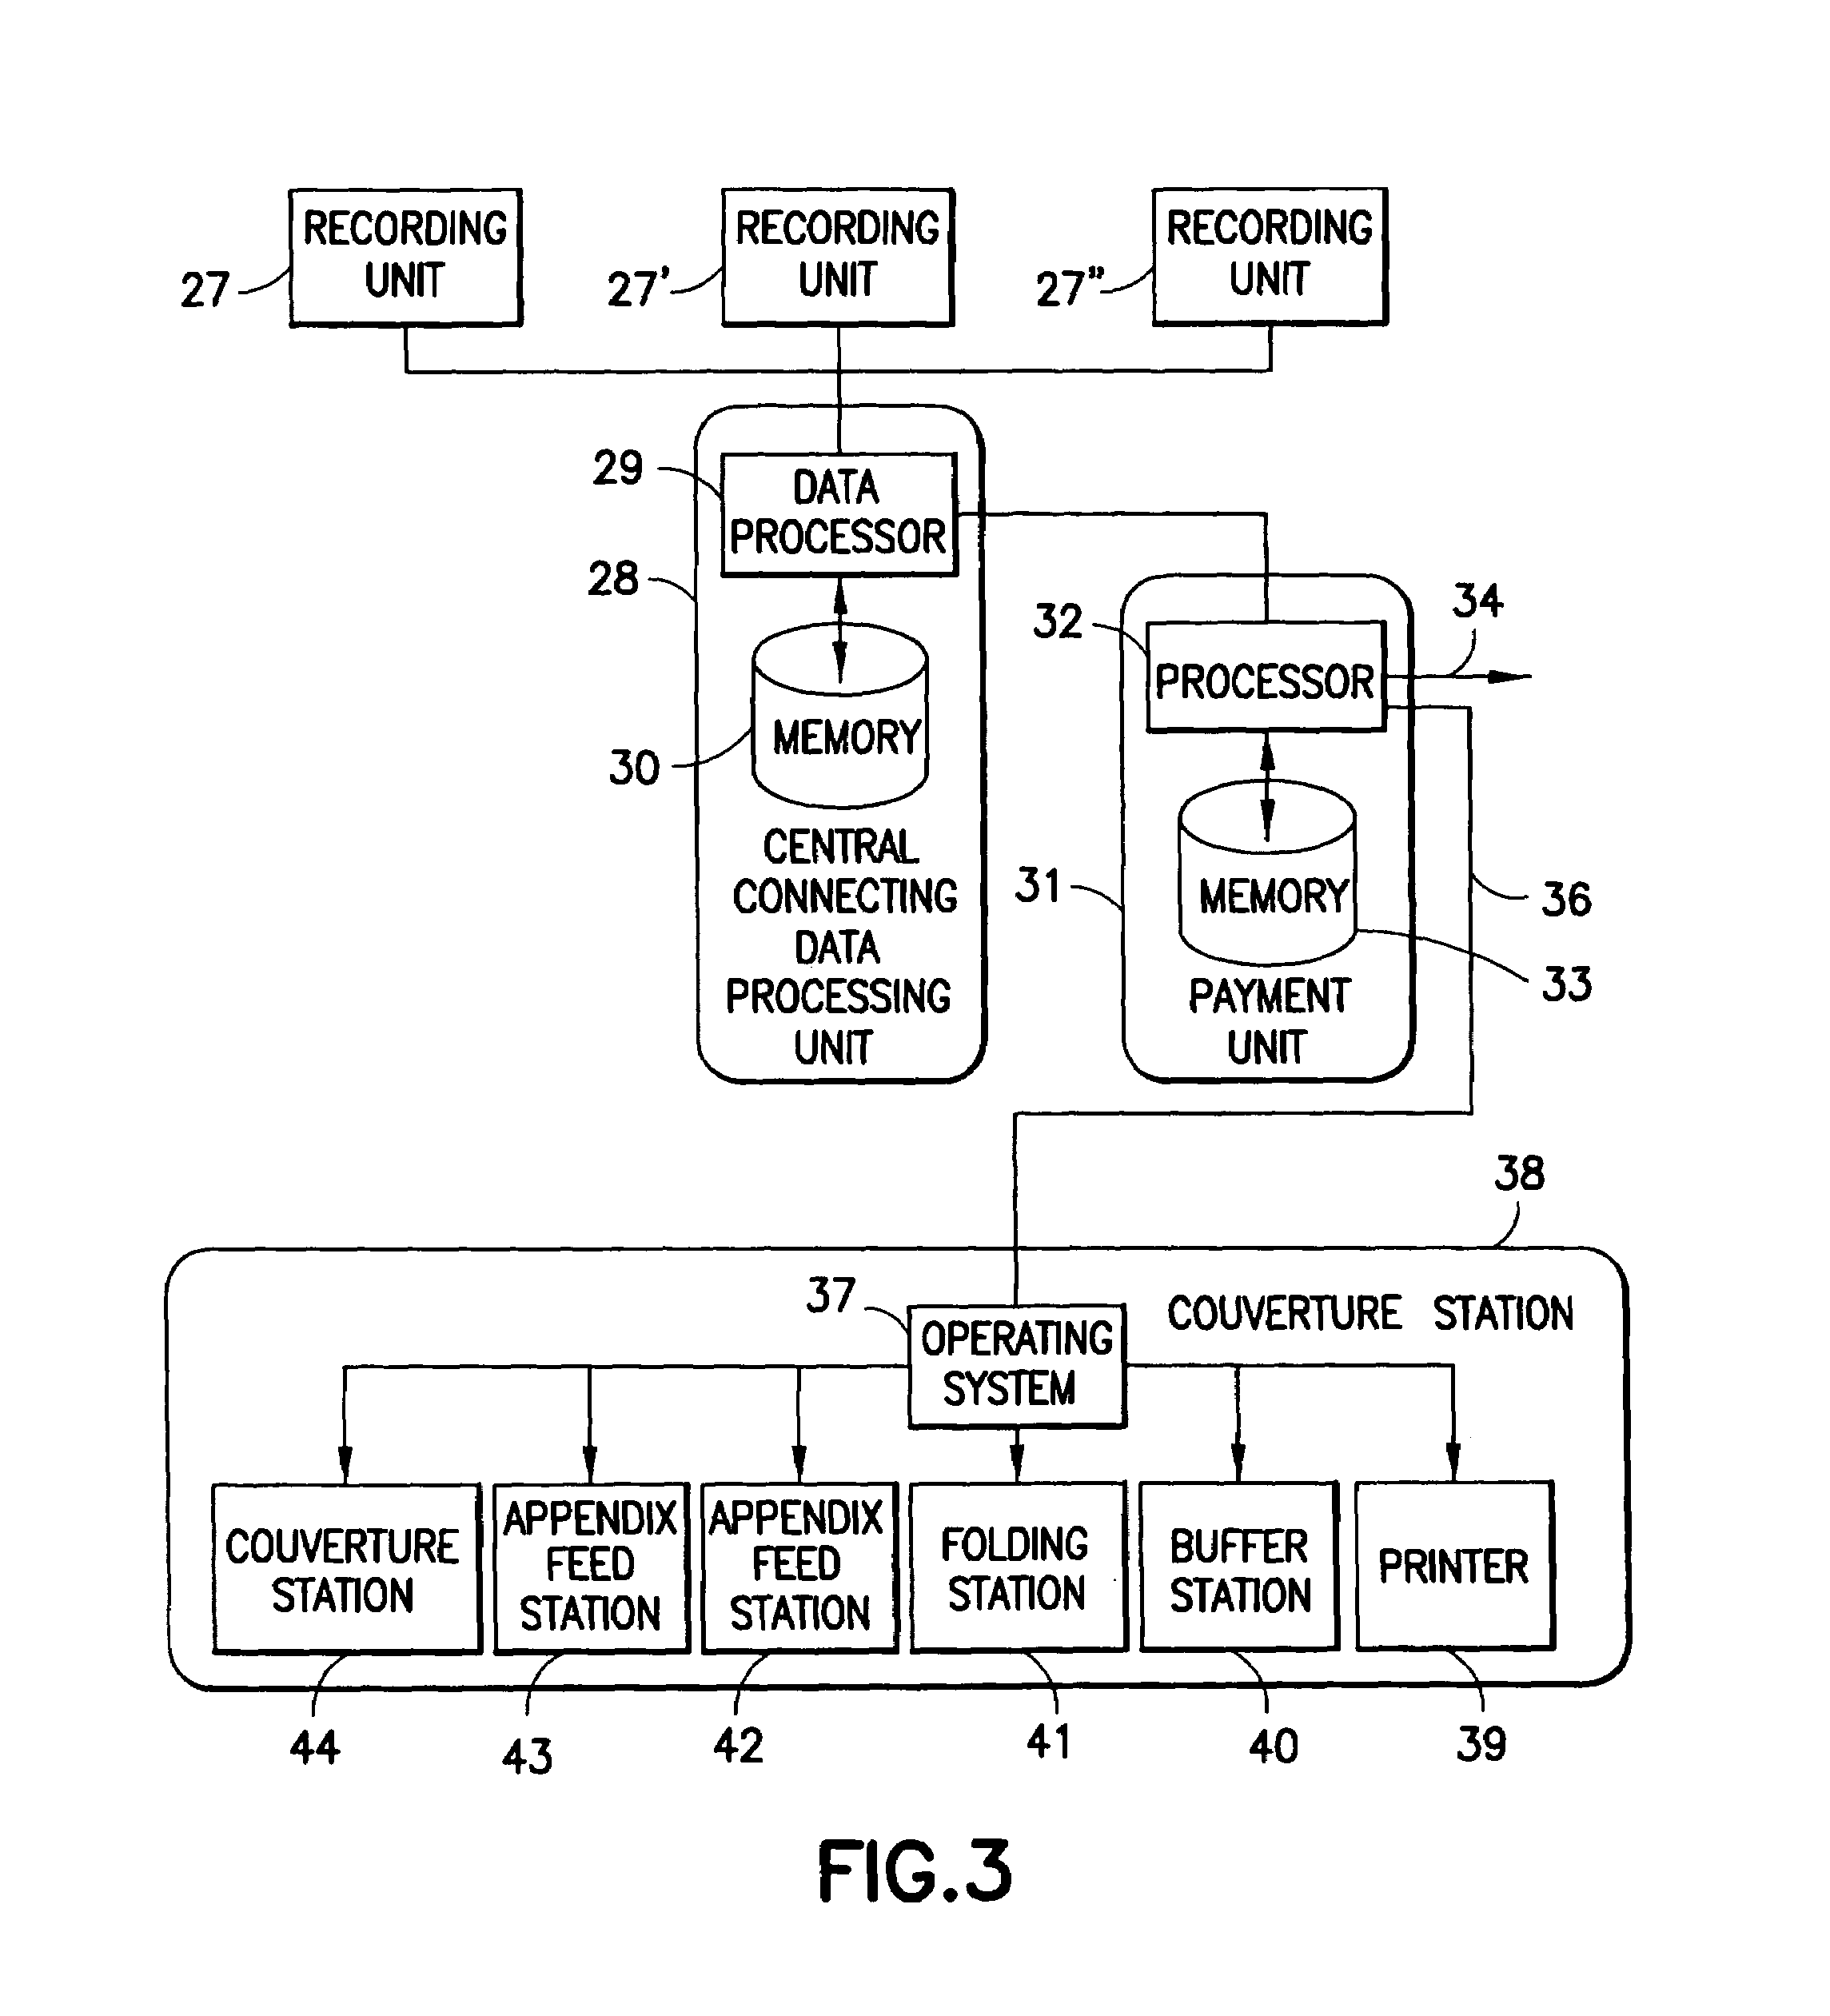 Access-point-dependent rate fixing of telecommunication links